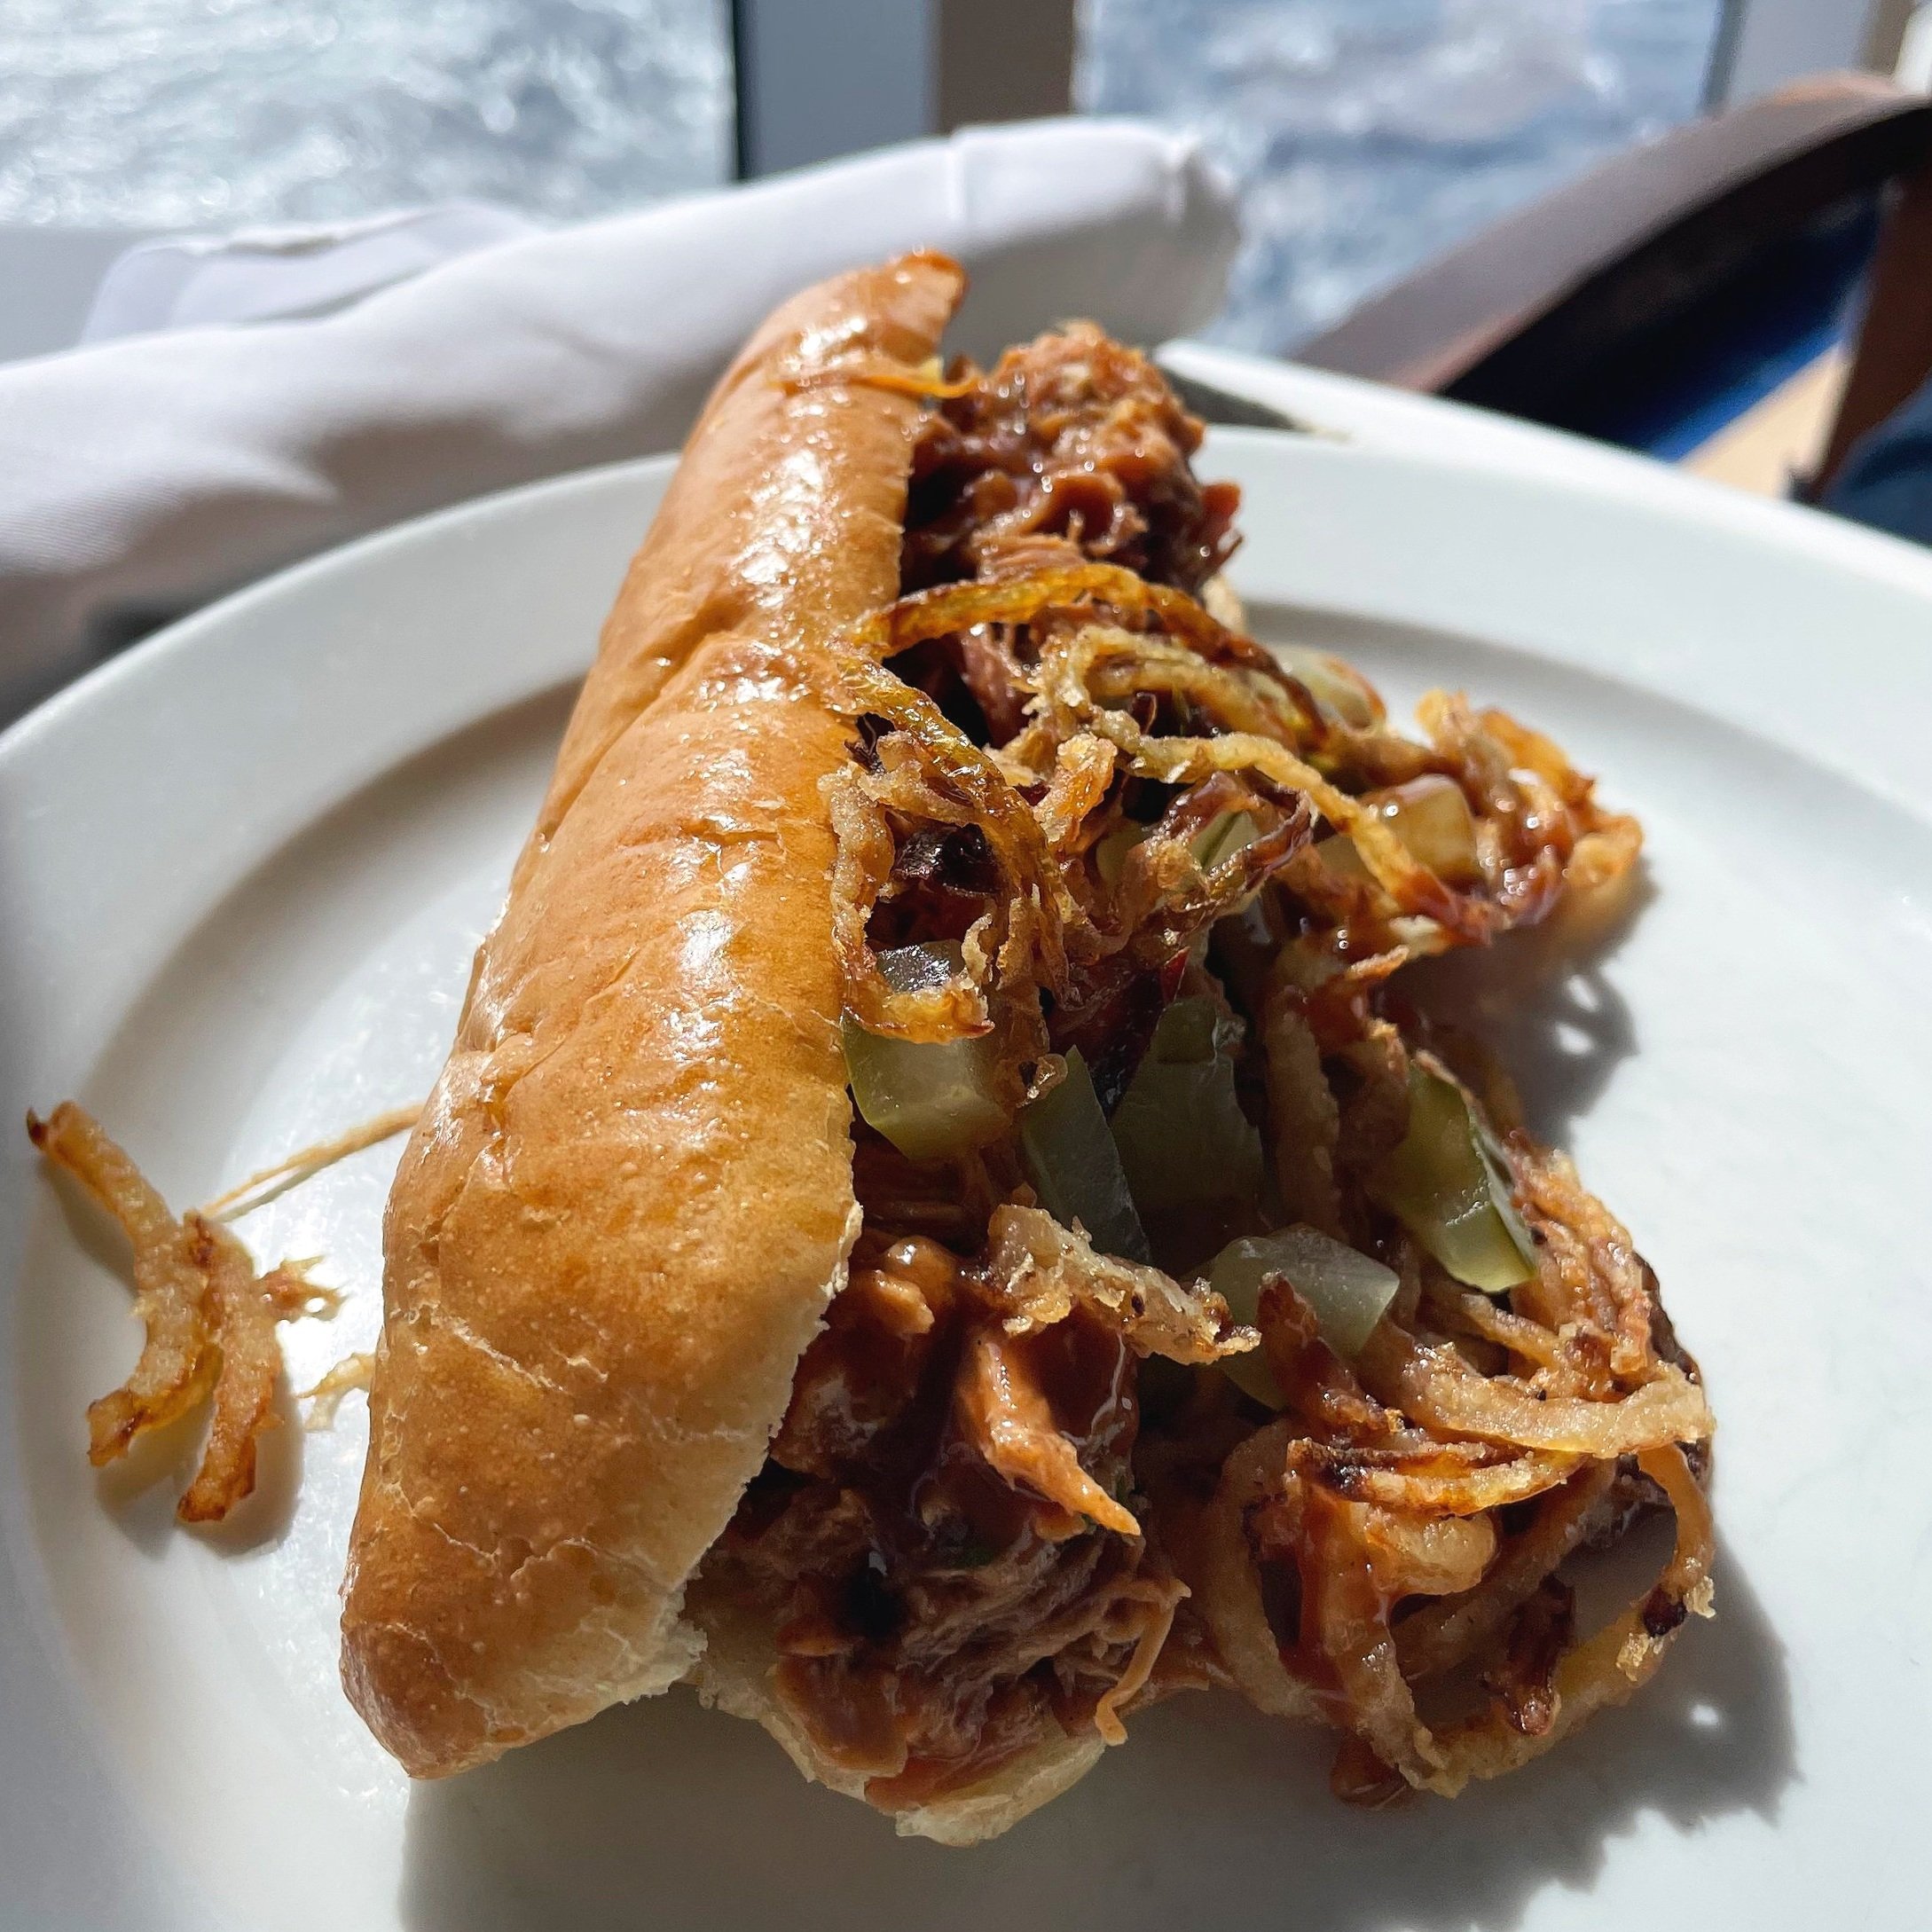  Pulled pork sandwich from the cart 